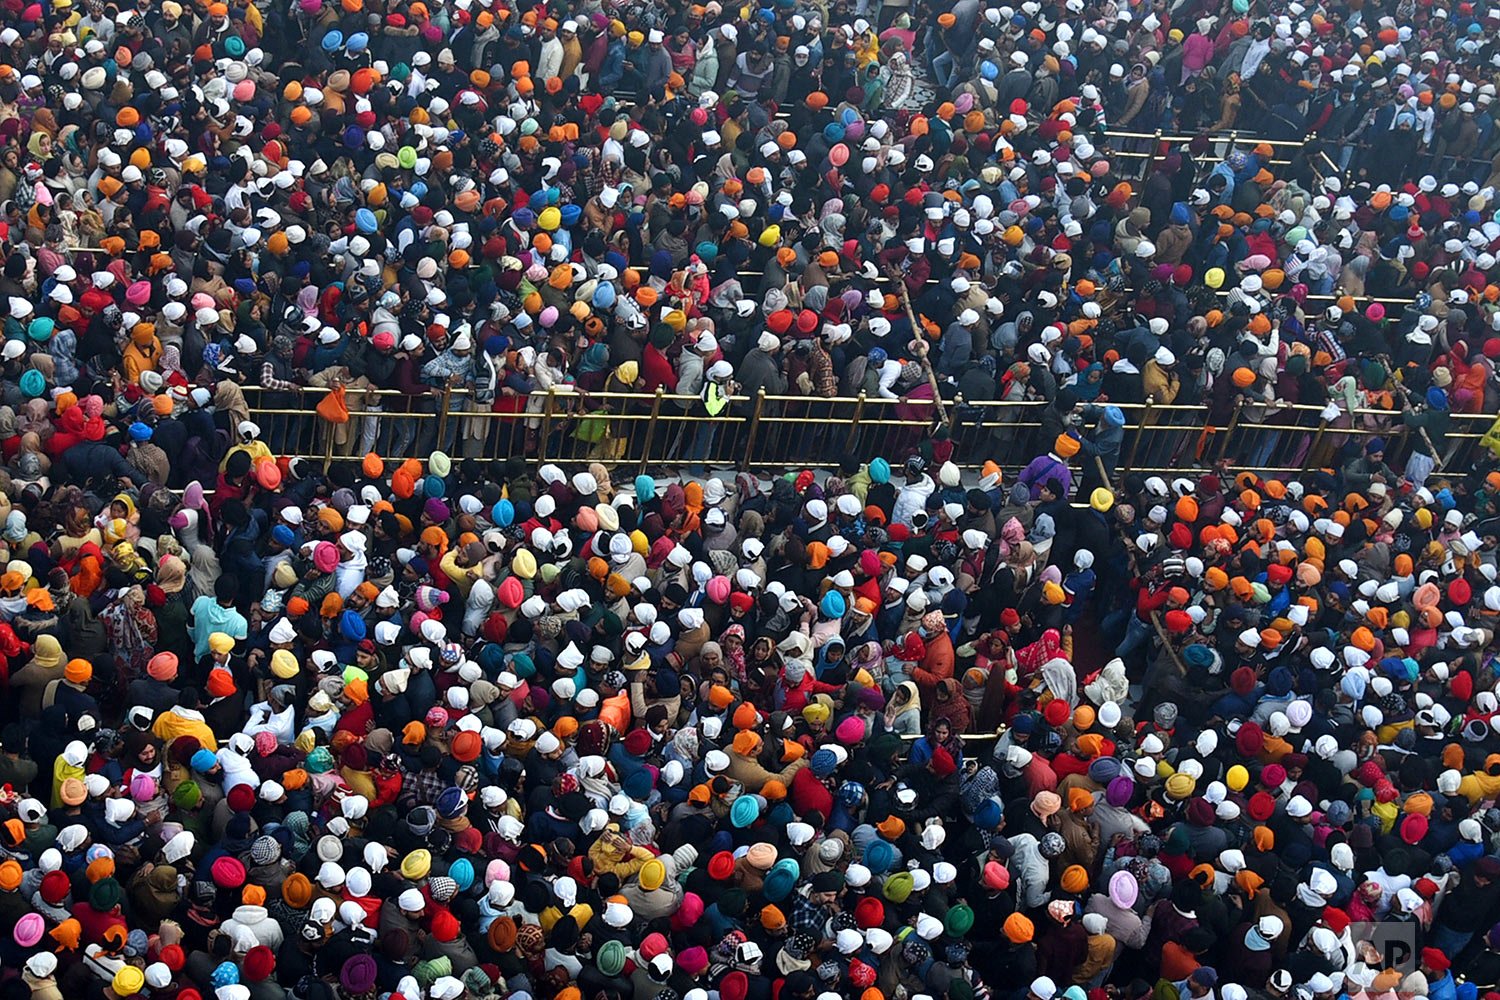  Sikh devotees gather to pay obeisance at the Golden Temple, the holiest of Sikh shrines, on New Year's Day in Amritsar, India, Saturday, Jan. 1, 2022. (AP Photo/Prabhjot Gill) 